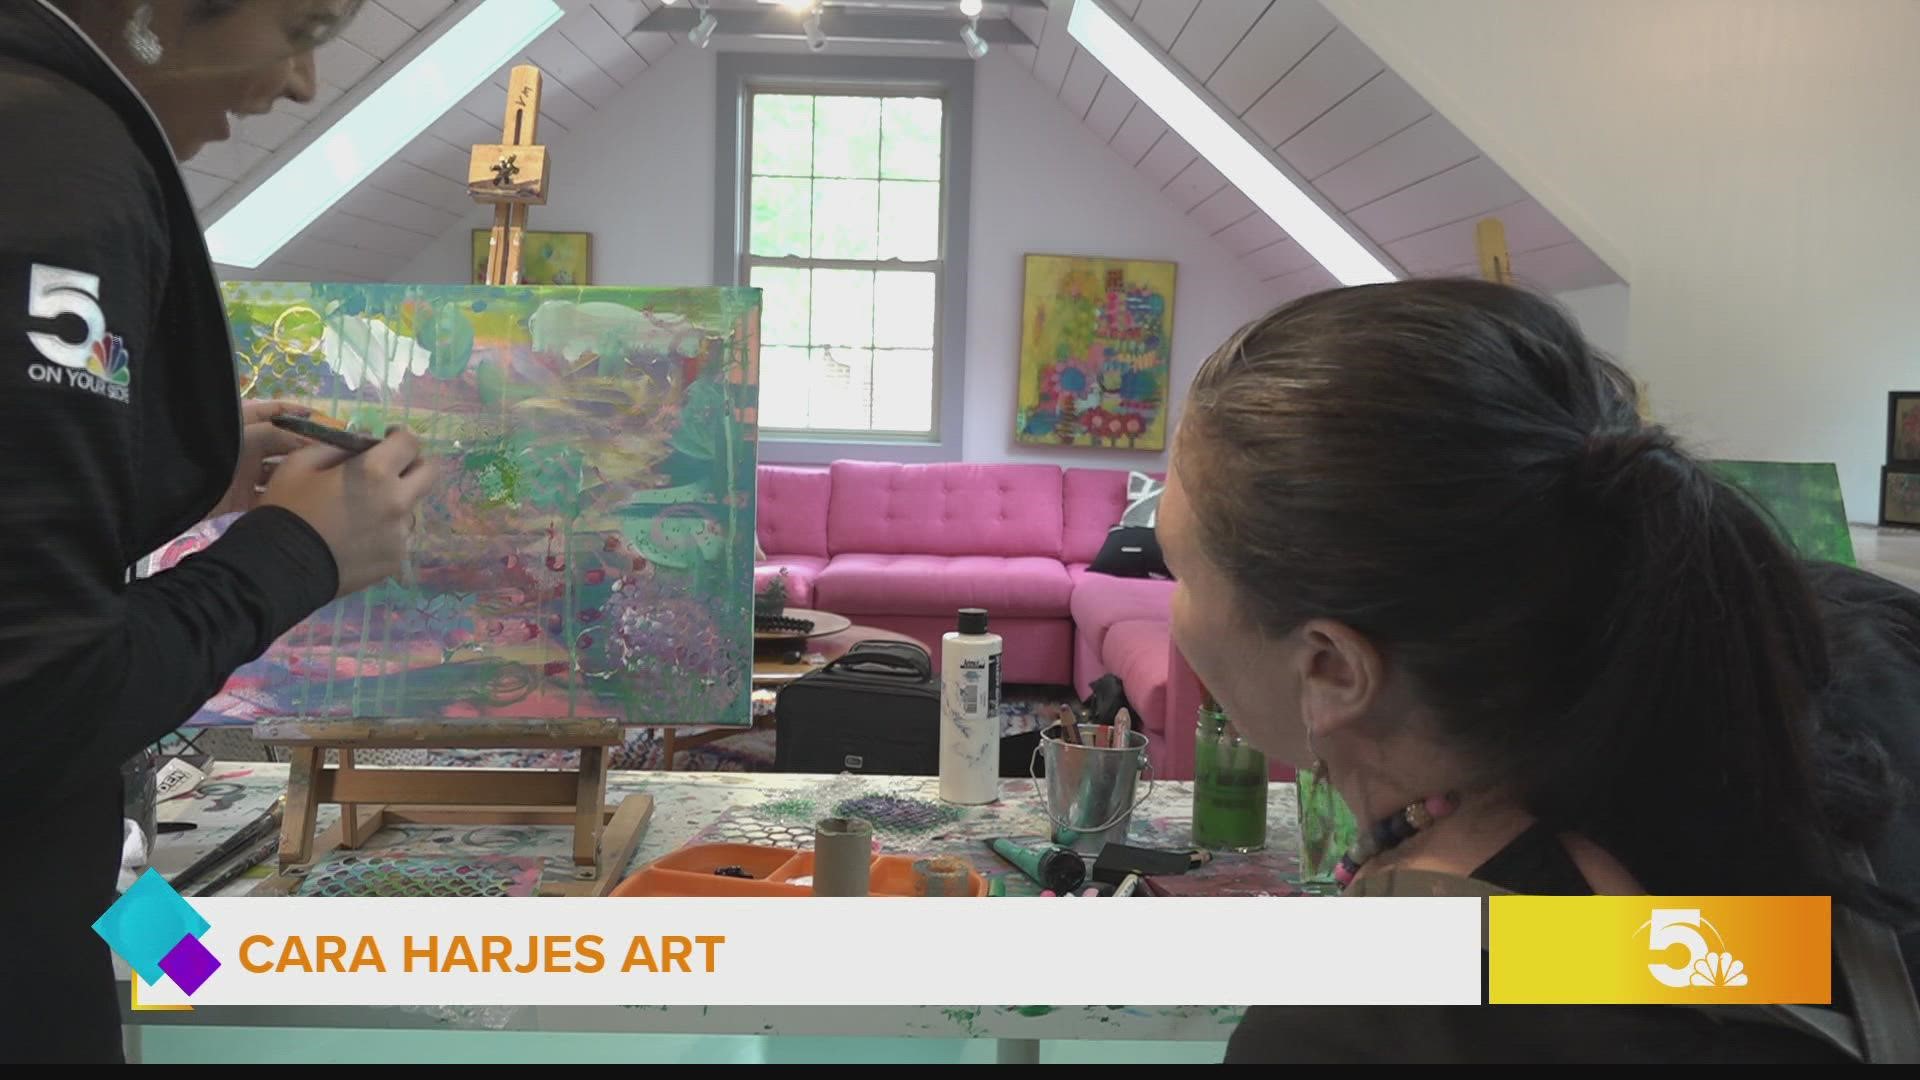 Mother, artist, widow and former counselor, Cara Harjes, continues turning rain into rainbows through intuitive painting.